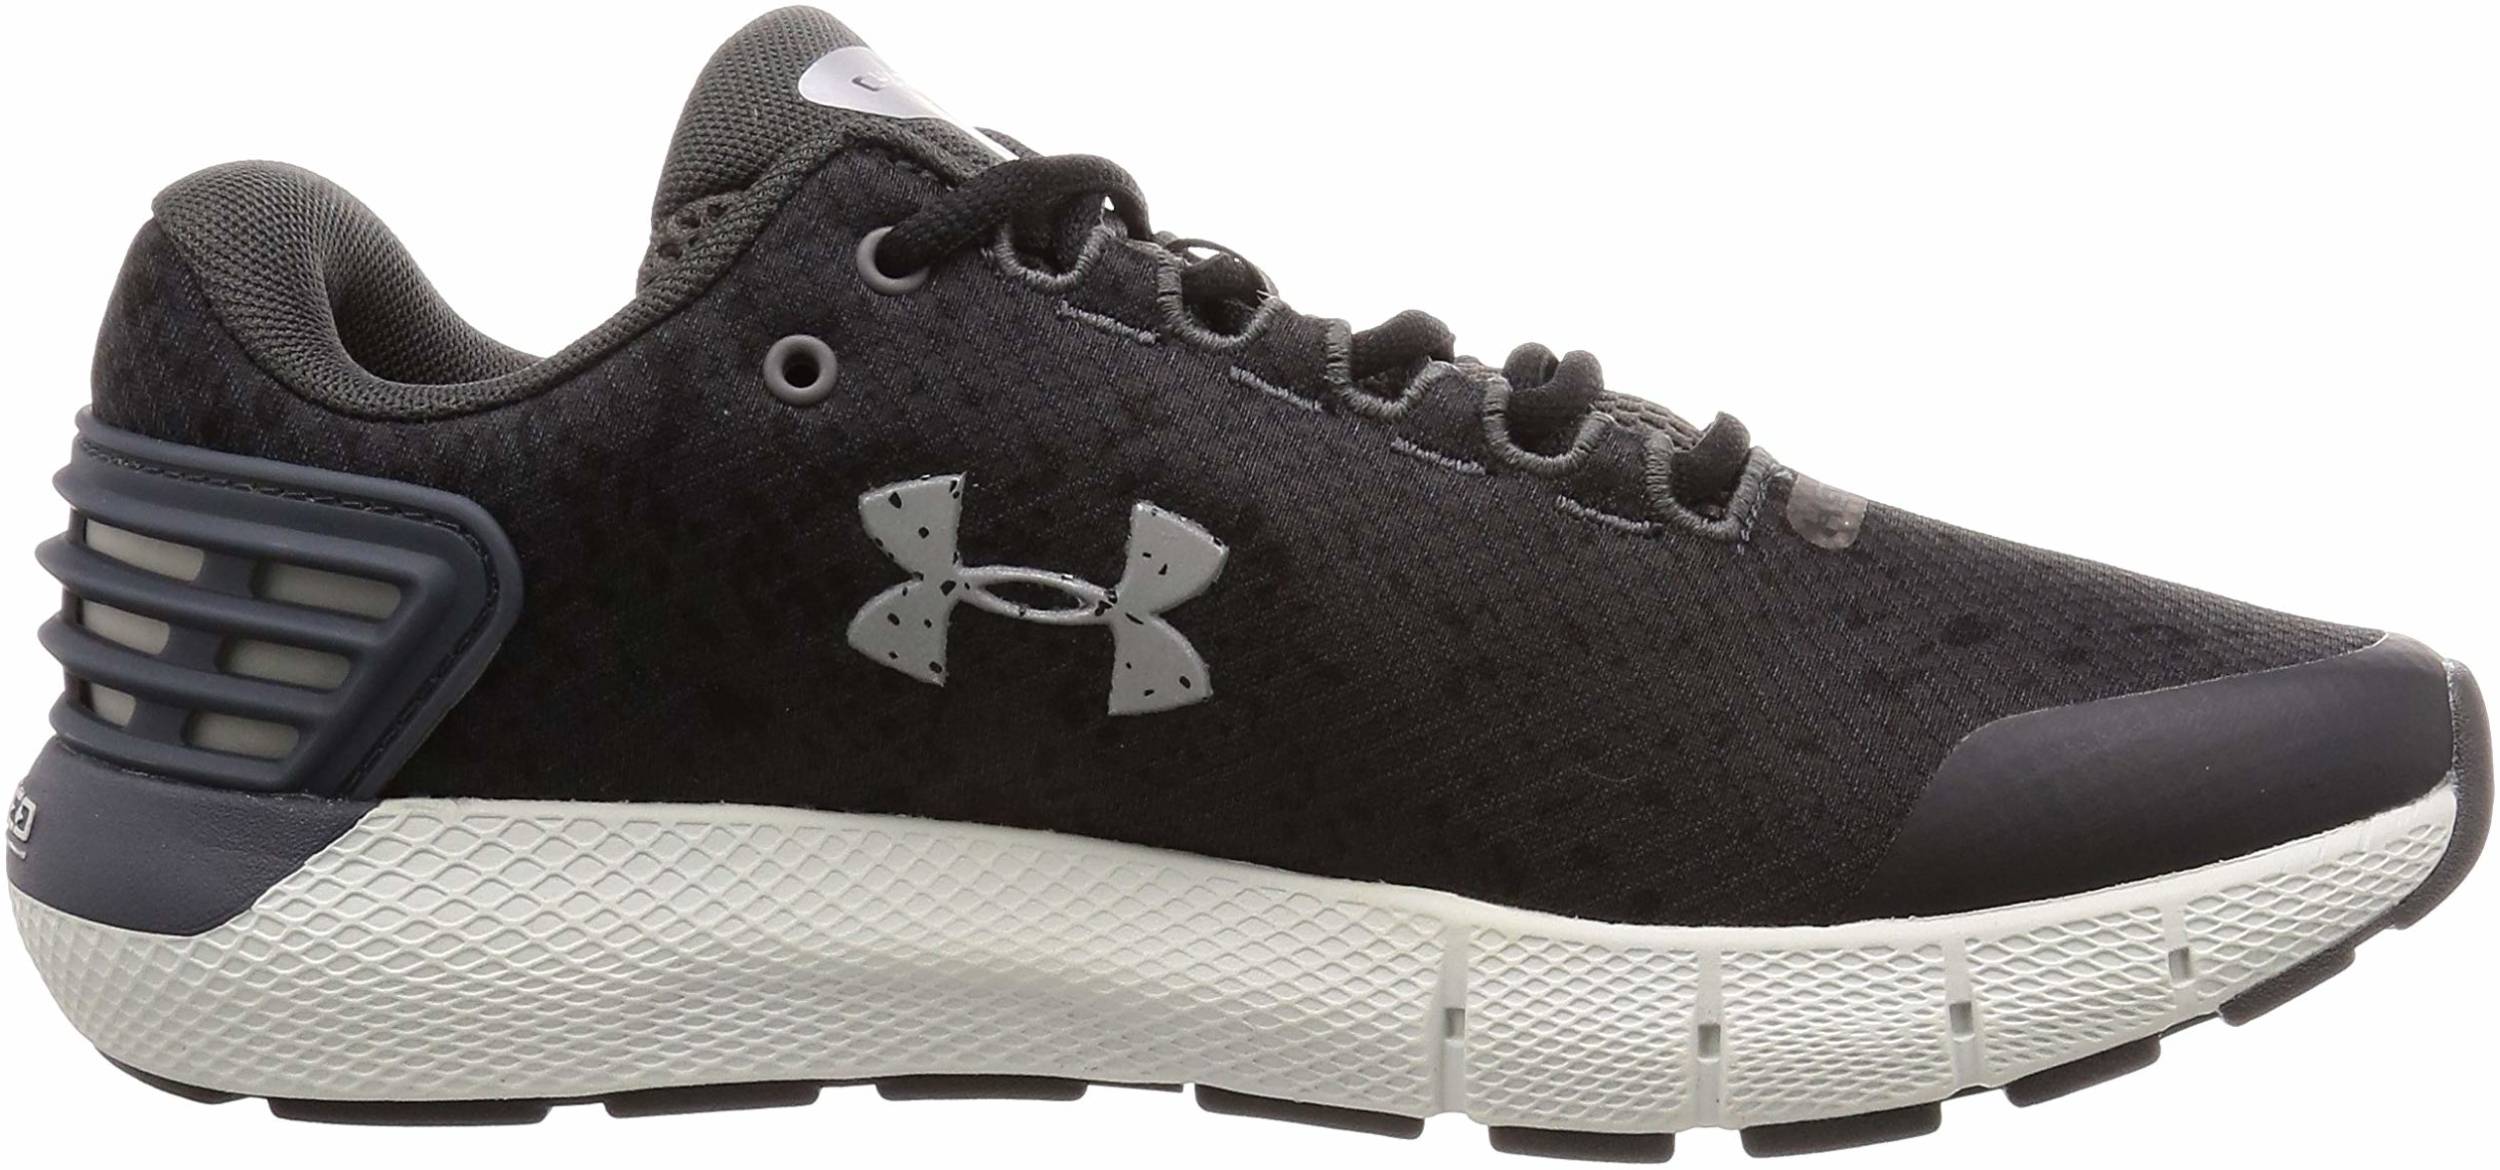 Under Armour Charged Rogue Storm Womens Running Shoes Black